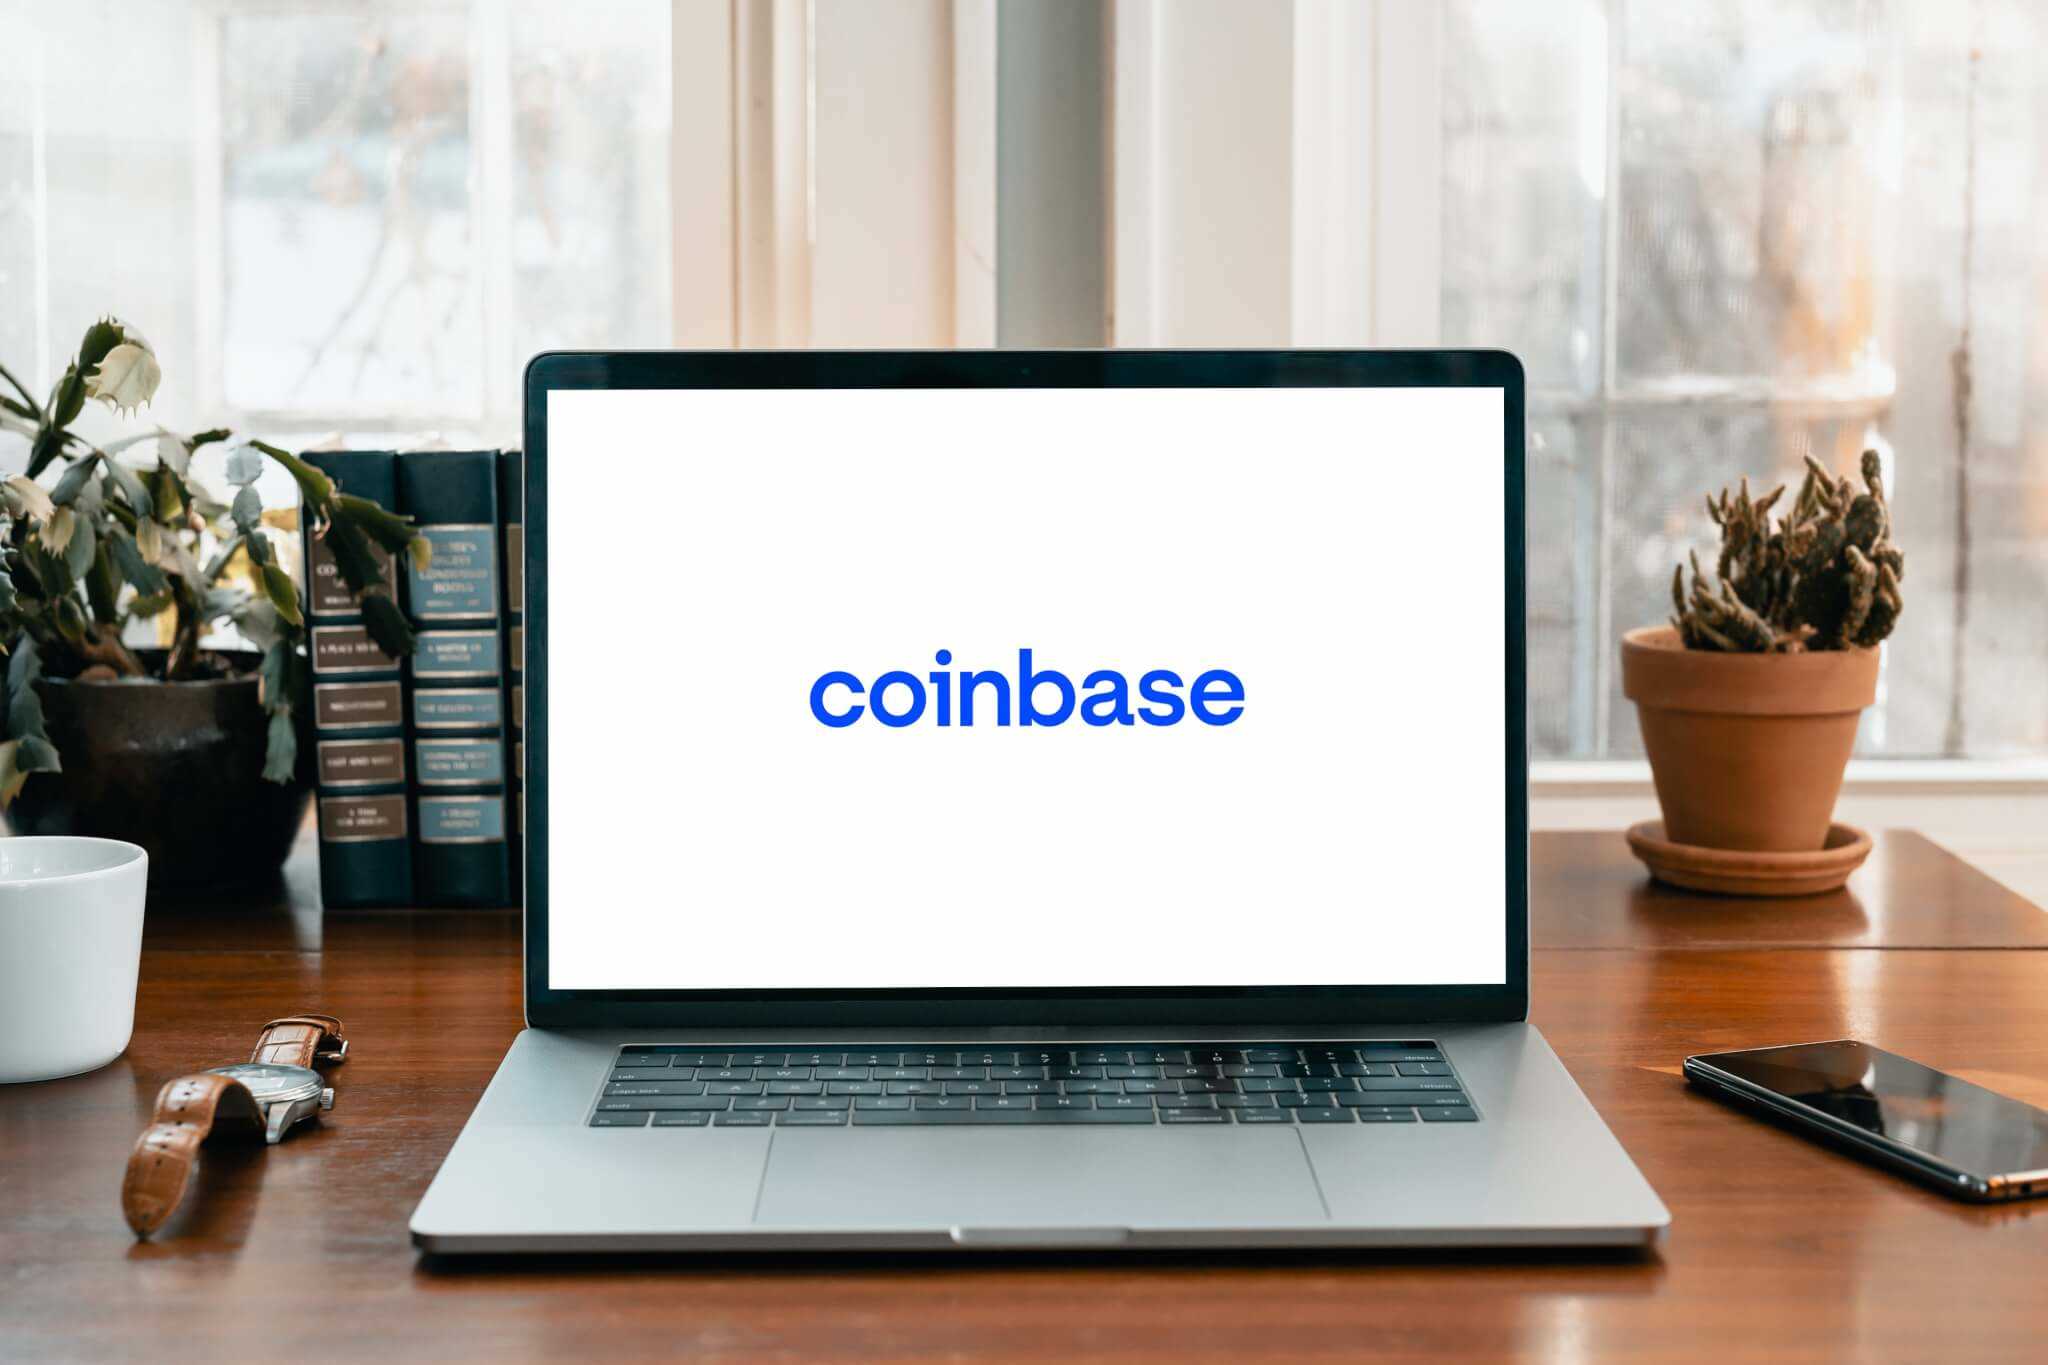 Coinbase stock outlook: H.C. Wainwright analyst sees upside to $75